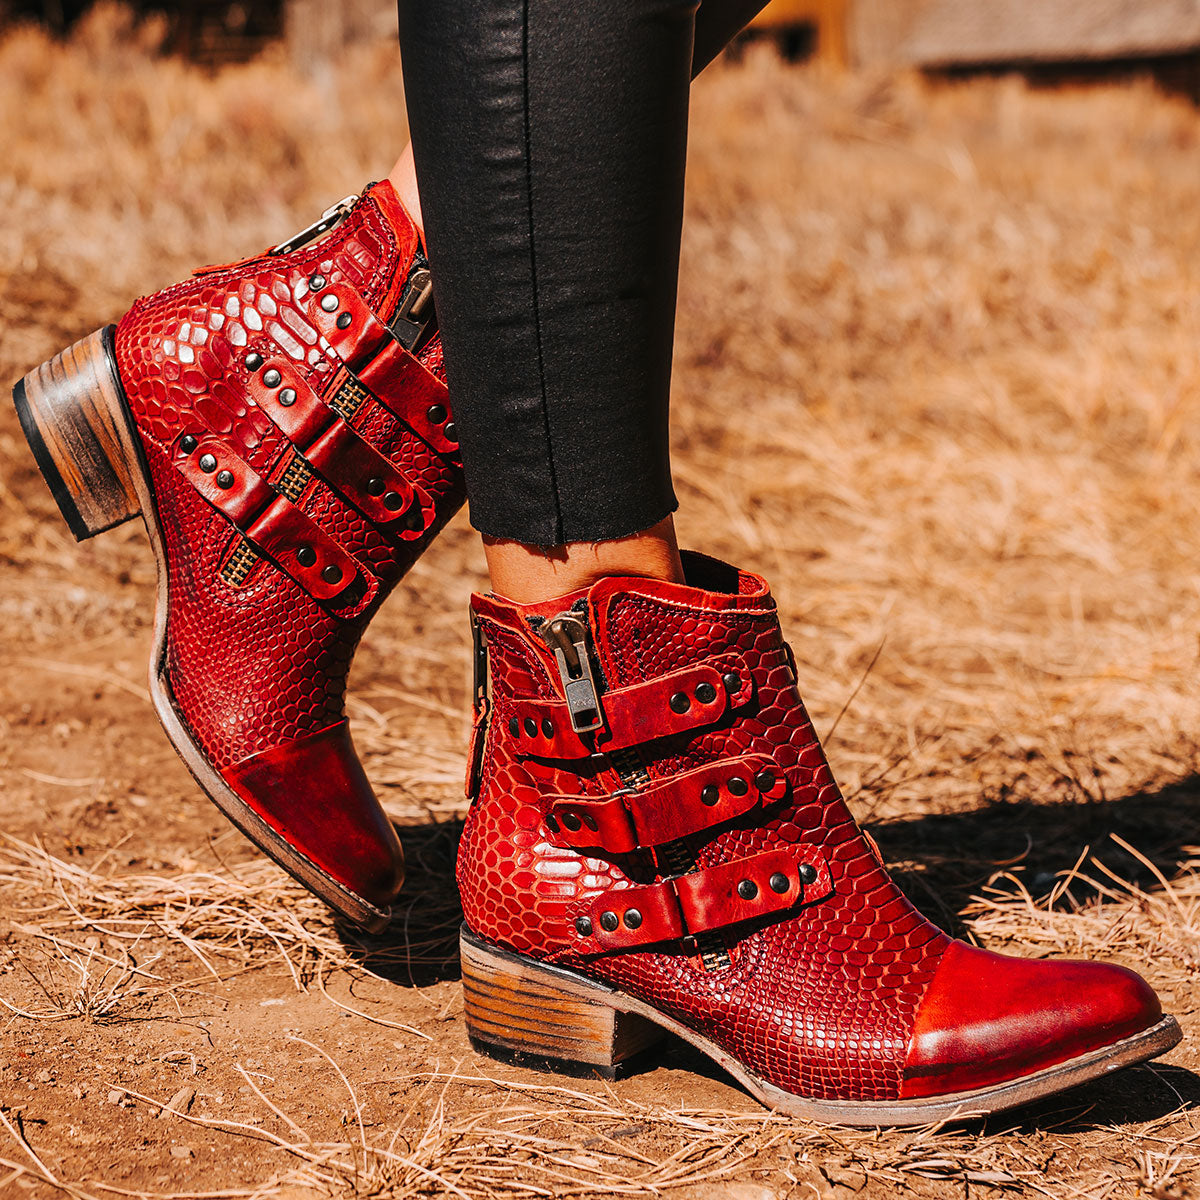 FREEBIRD women's Grecko red leather ankle bootie with studded symmetrical straps and heel brass zip closure